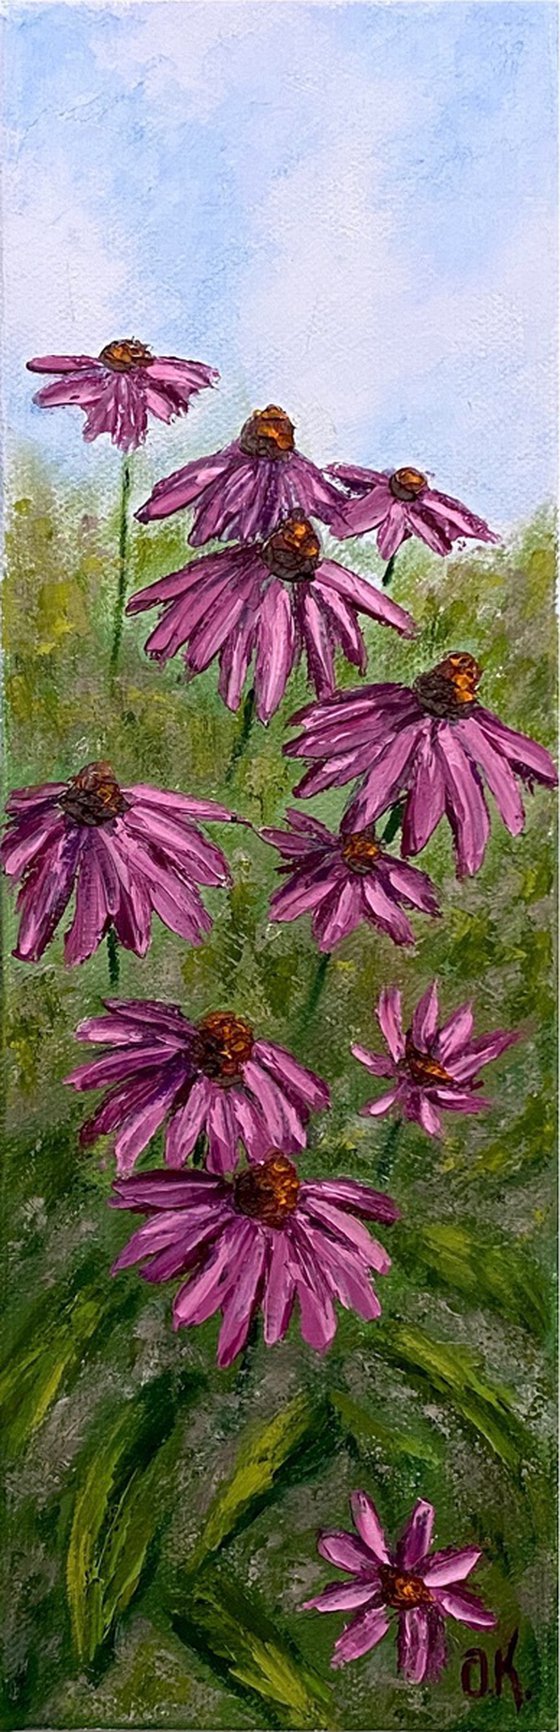 Coneflower party